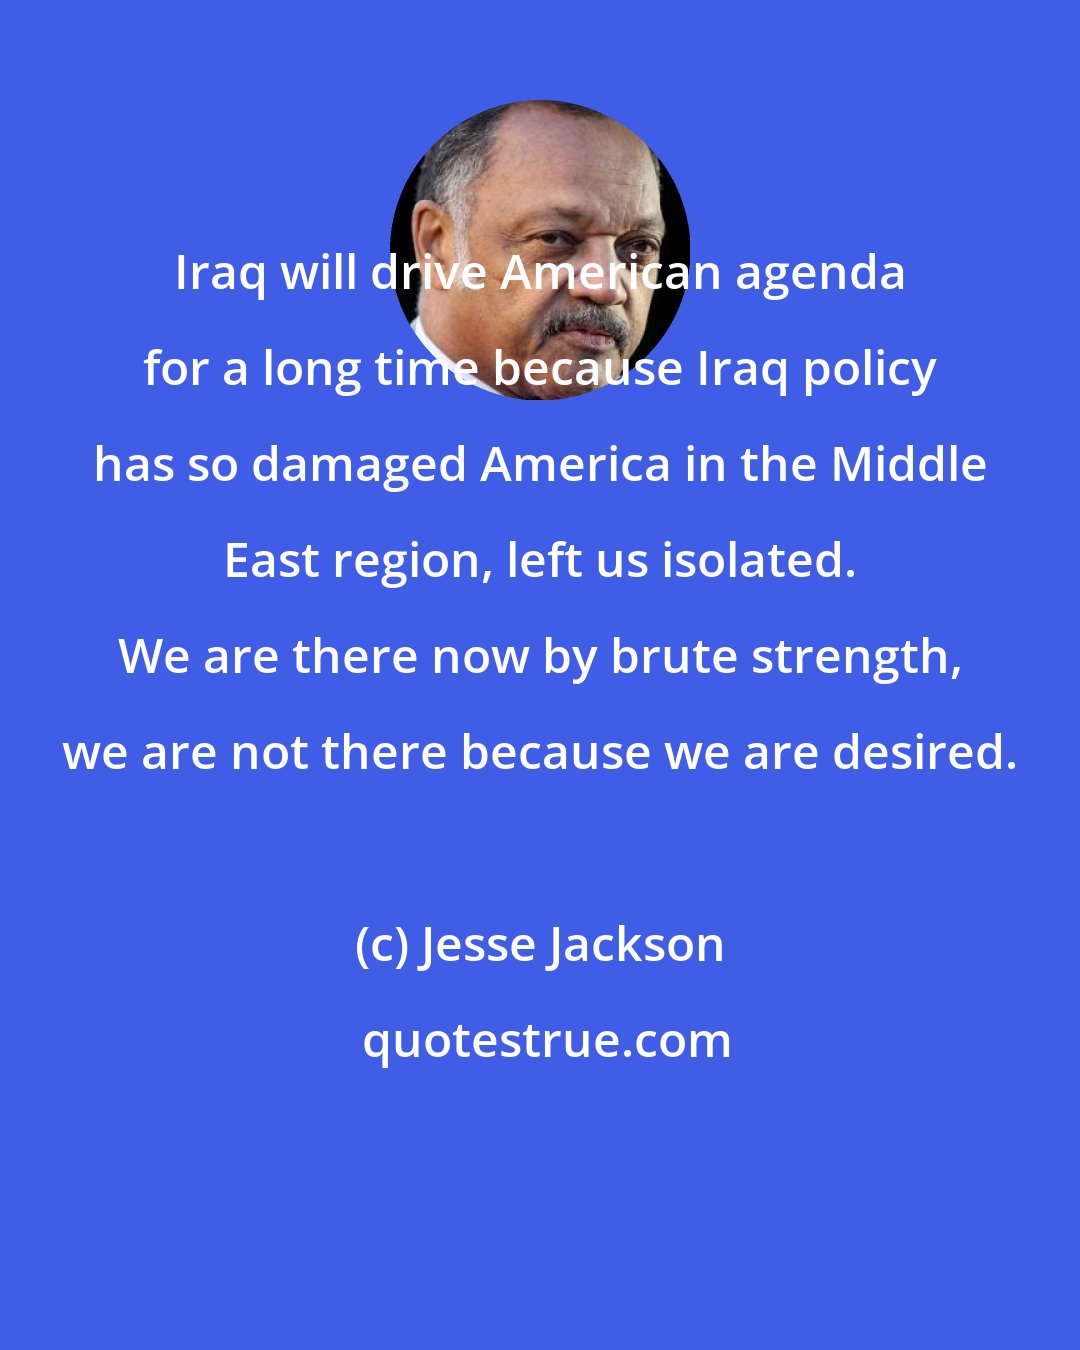 Jesse Jackson: Iraq will drive American agenda for a long time because Iraq policy has so damaged America in the Middle East region, left us isolated. We are there now by brute strength, we are not there because we are desired.